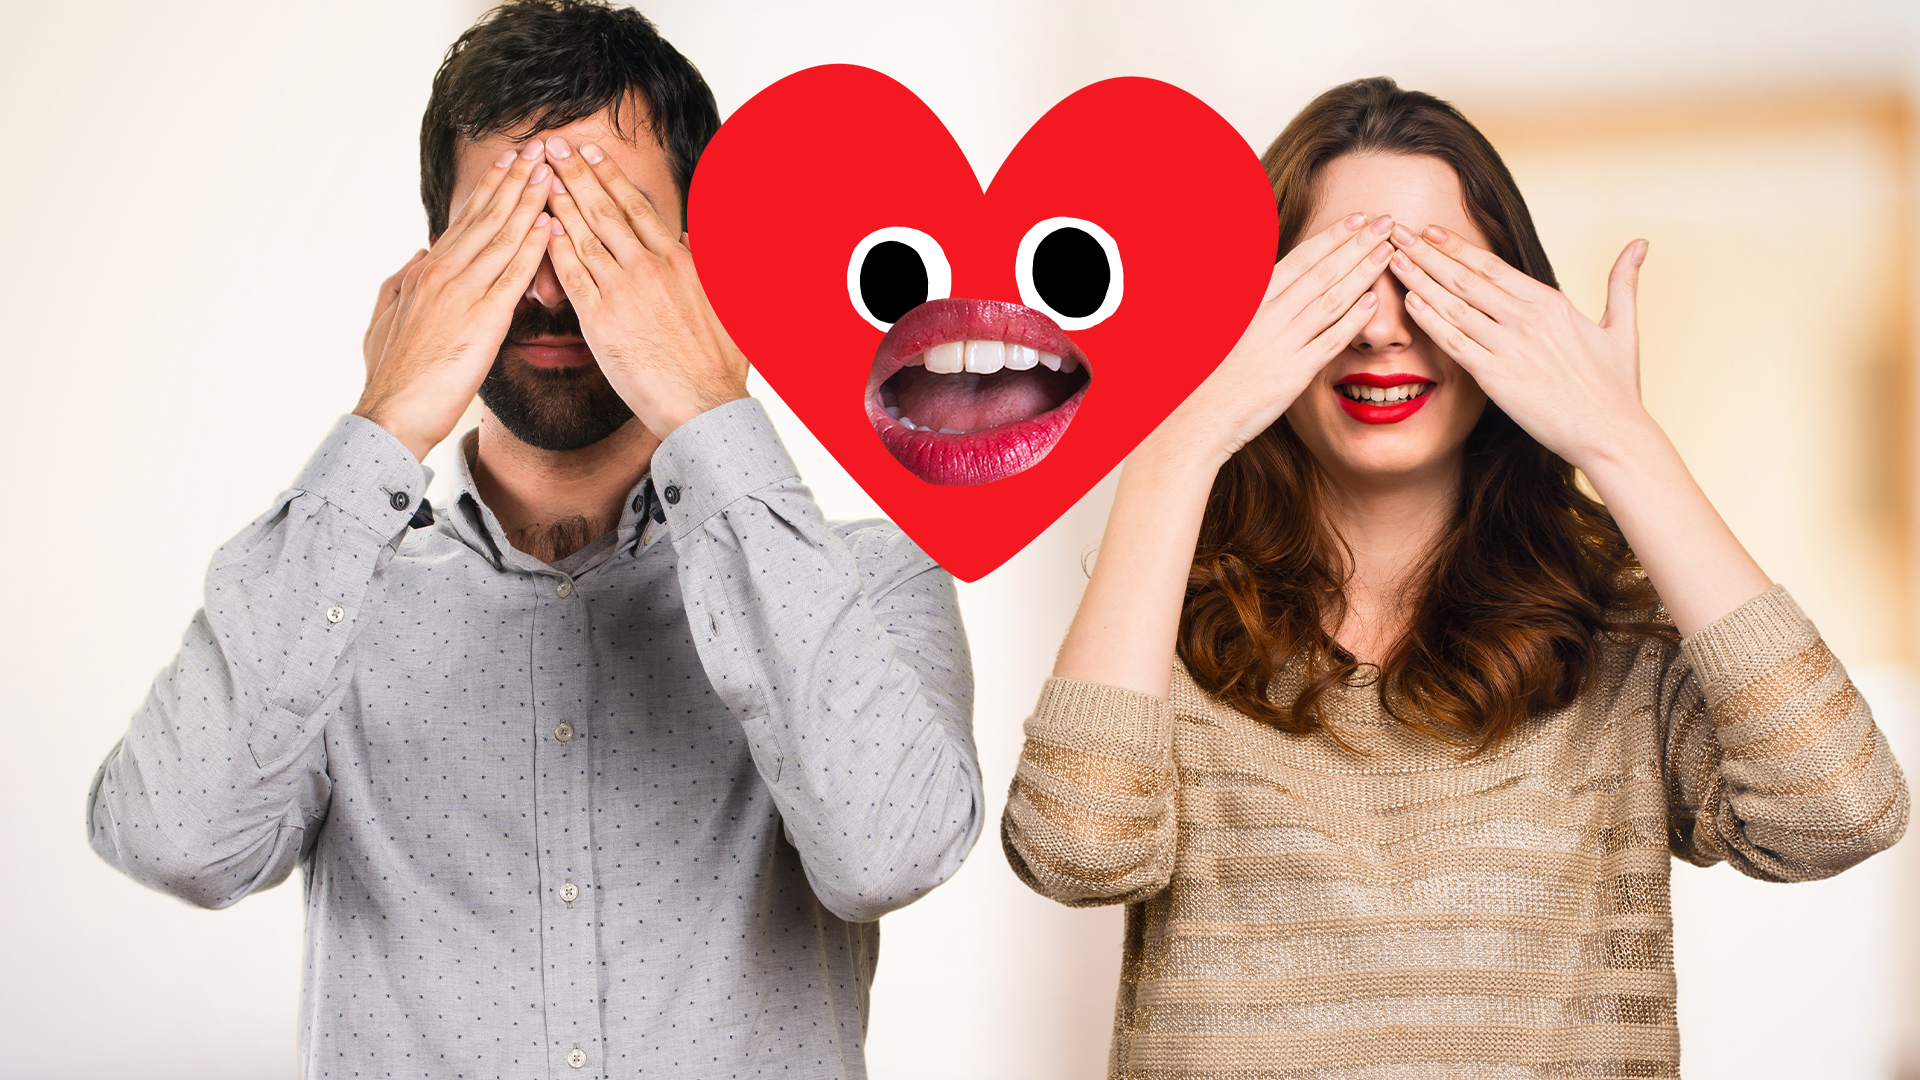 Man and woman with hands over their eyes and a smiling heart